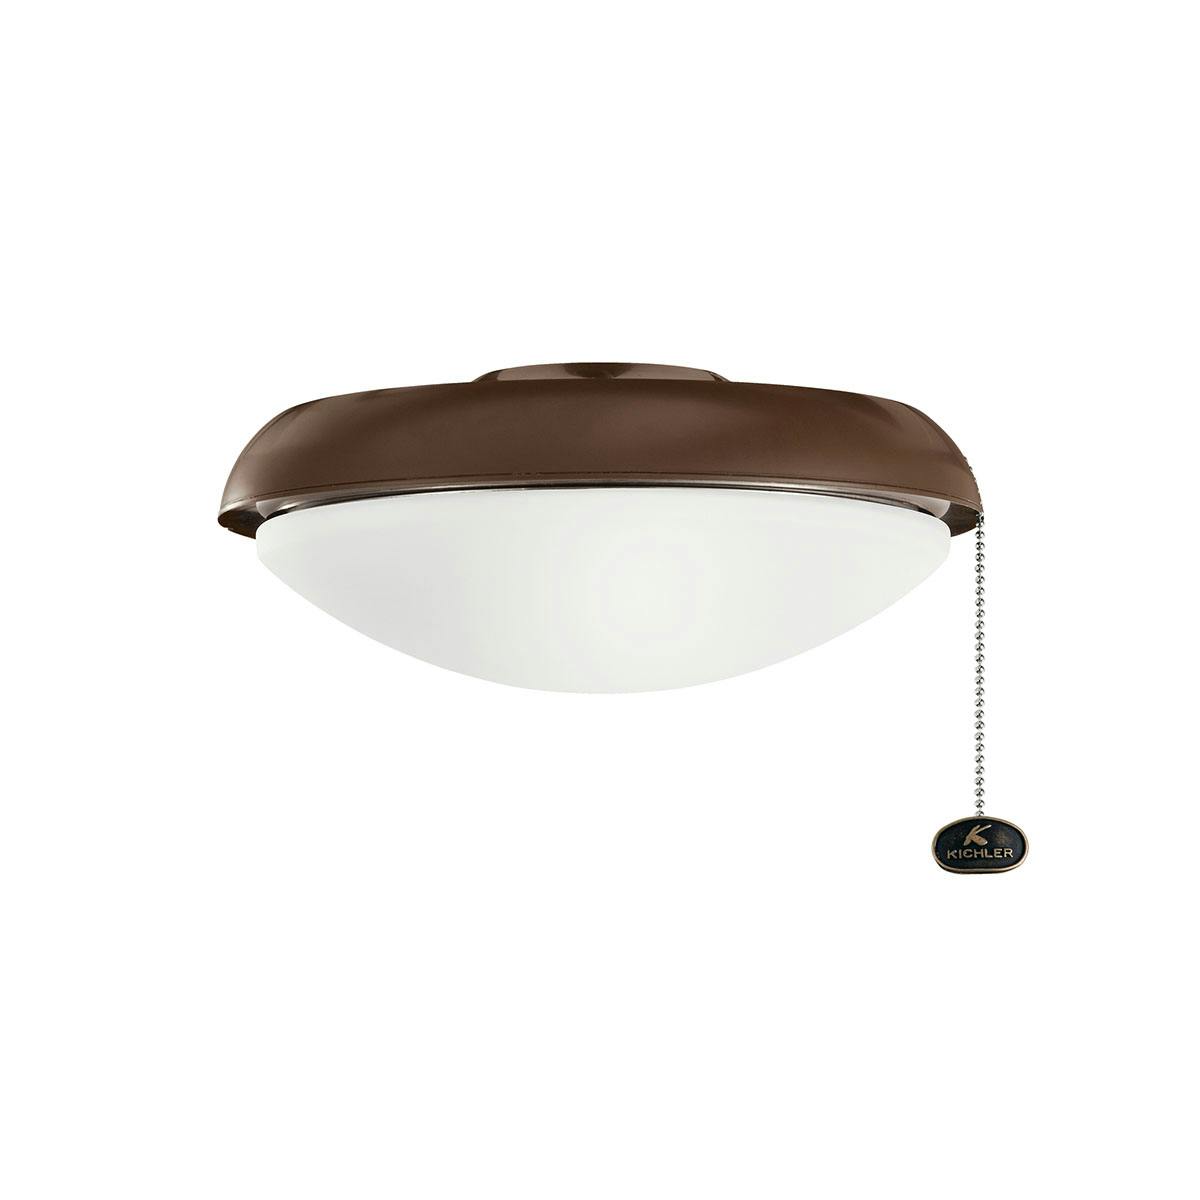 LED Slim Profile in Coffee Mocha on a white background